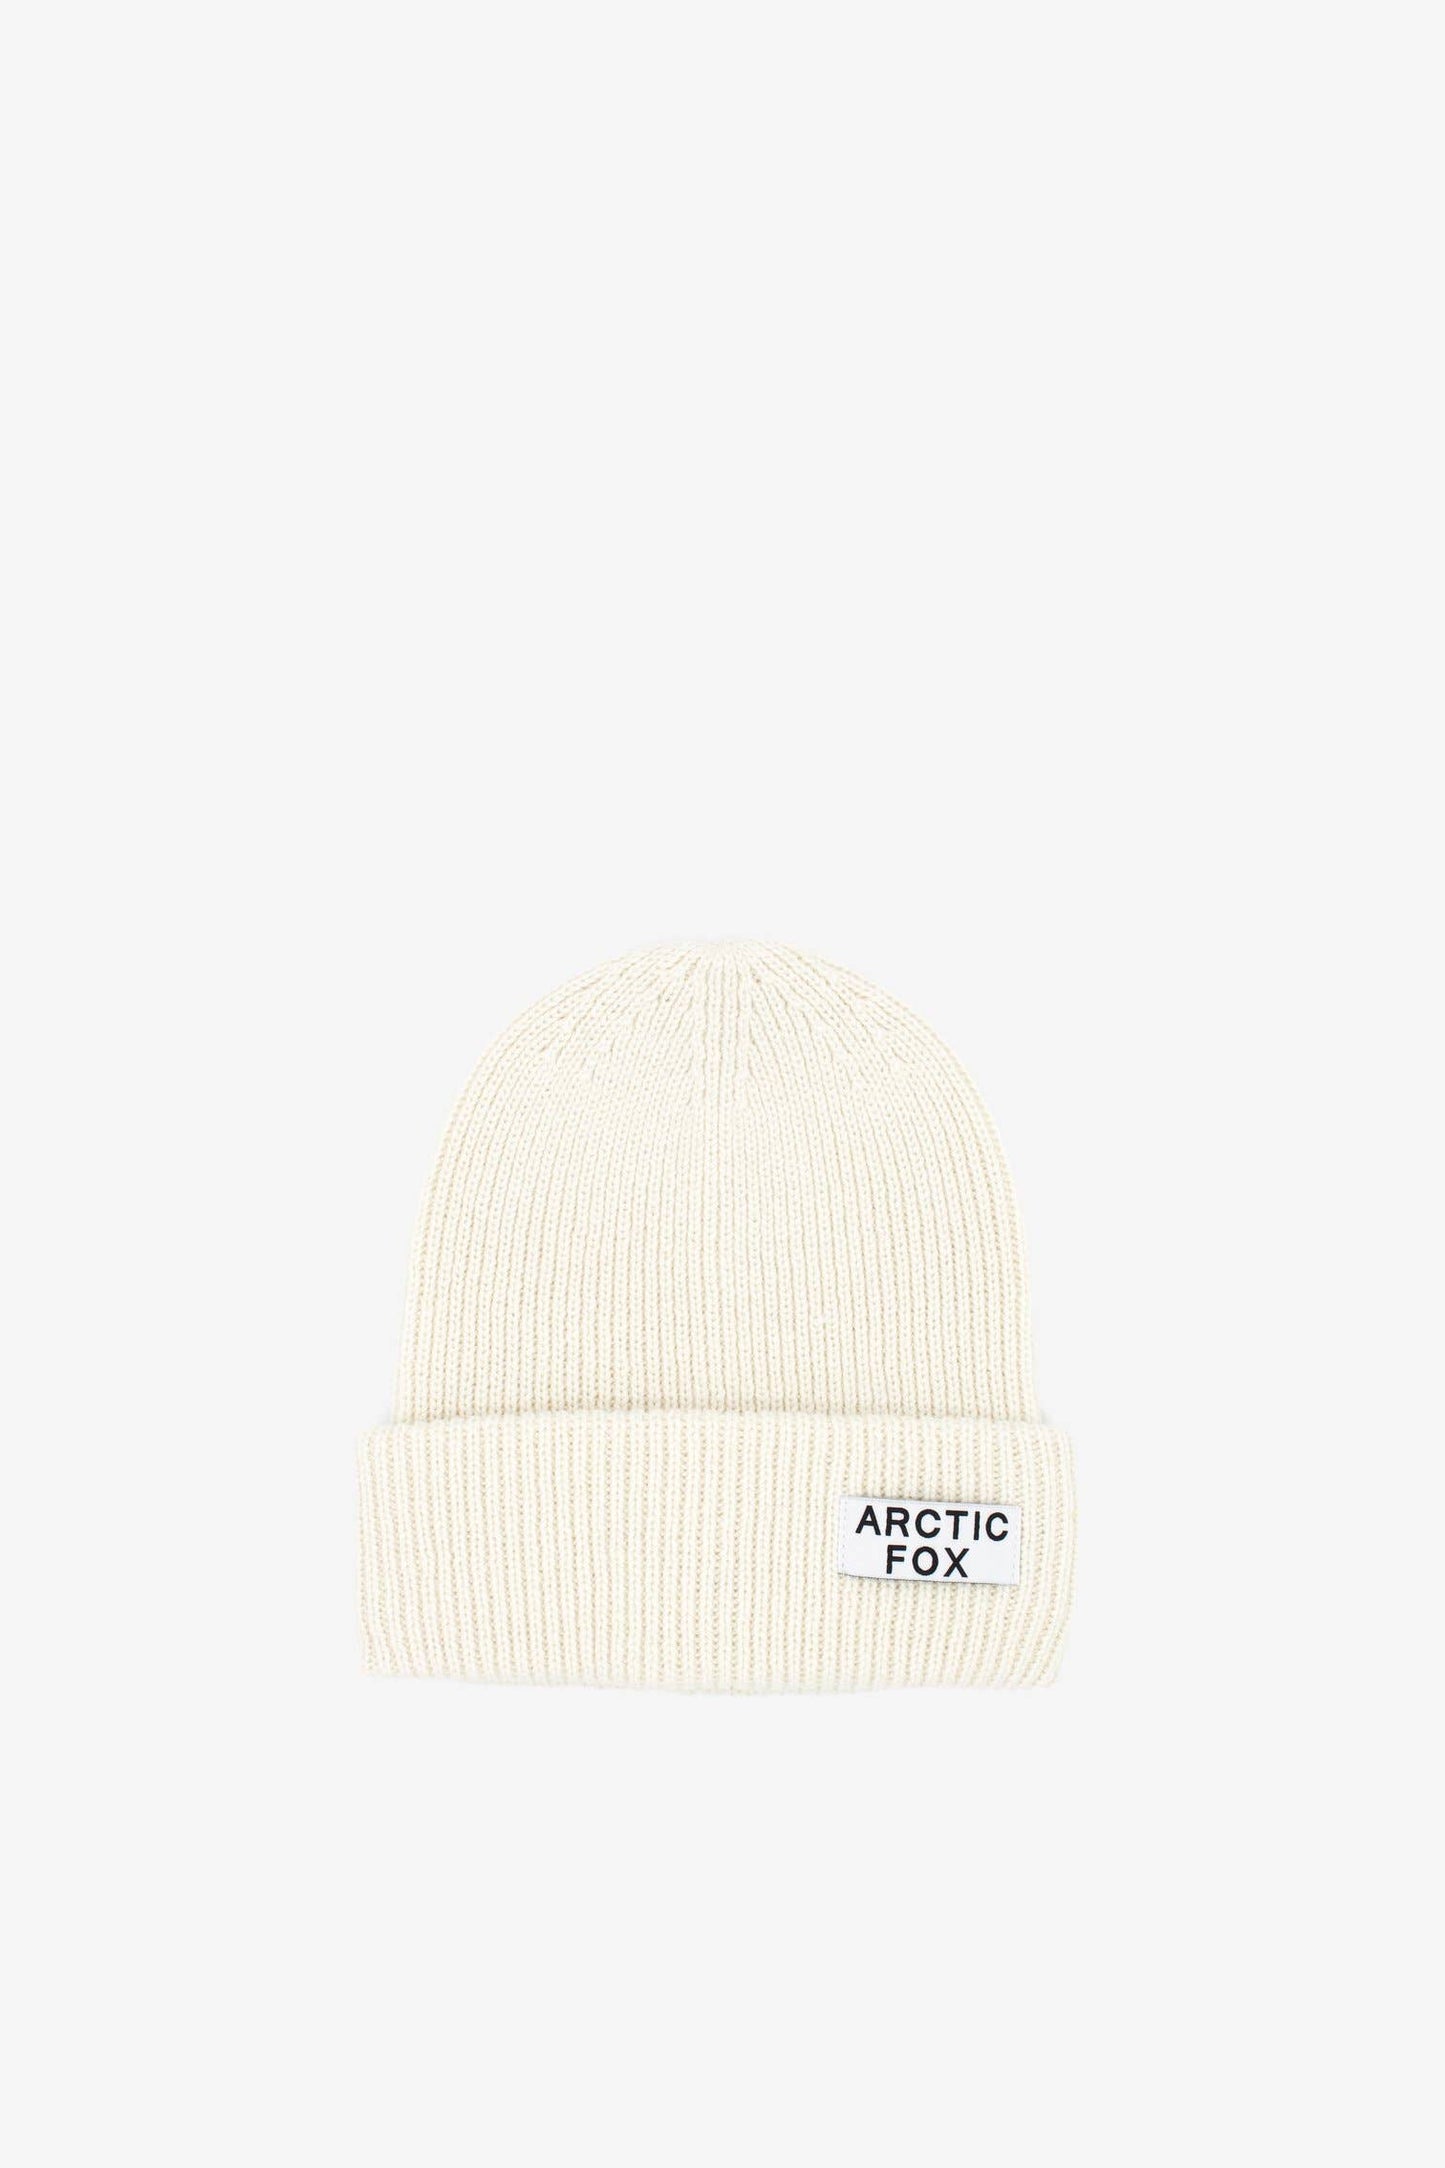 The Recycled Bottle Beanie in Winter White